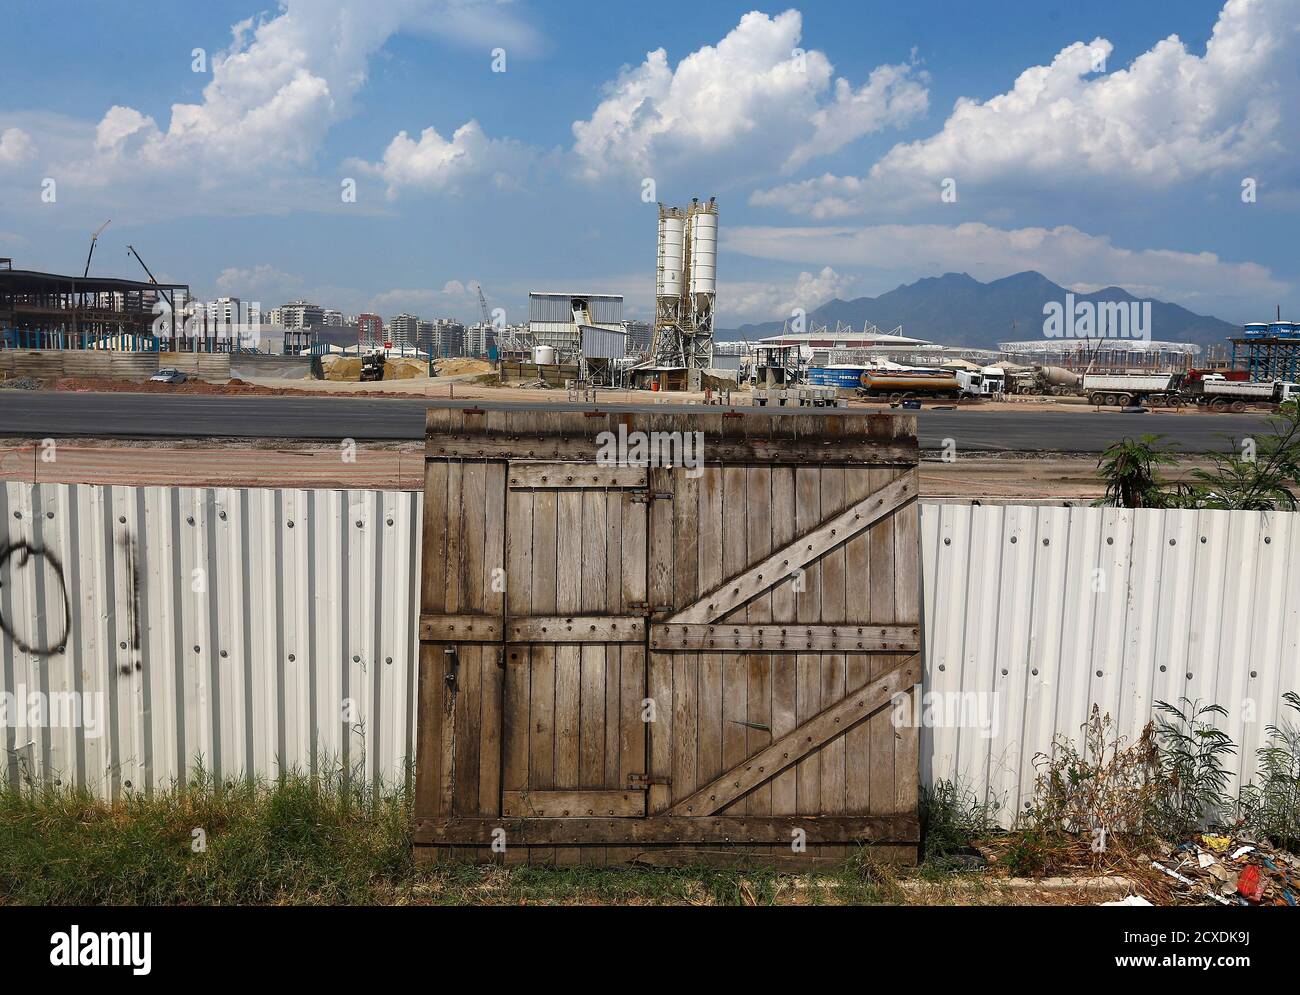 The Door Of A Demolished House Leans On The Fence Of A Construction Site For The Rio 16 Olympic Park At The Vila Autodromo Favela In Rio De Janeiro January 28 15